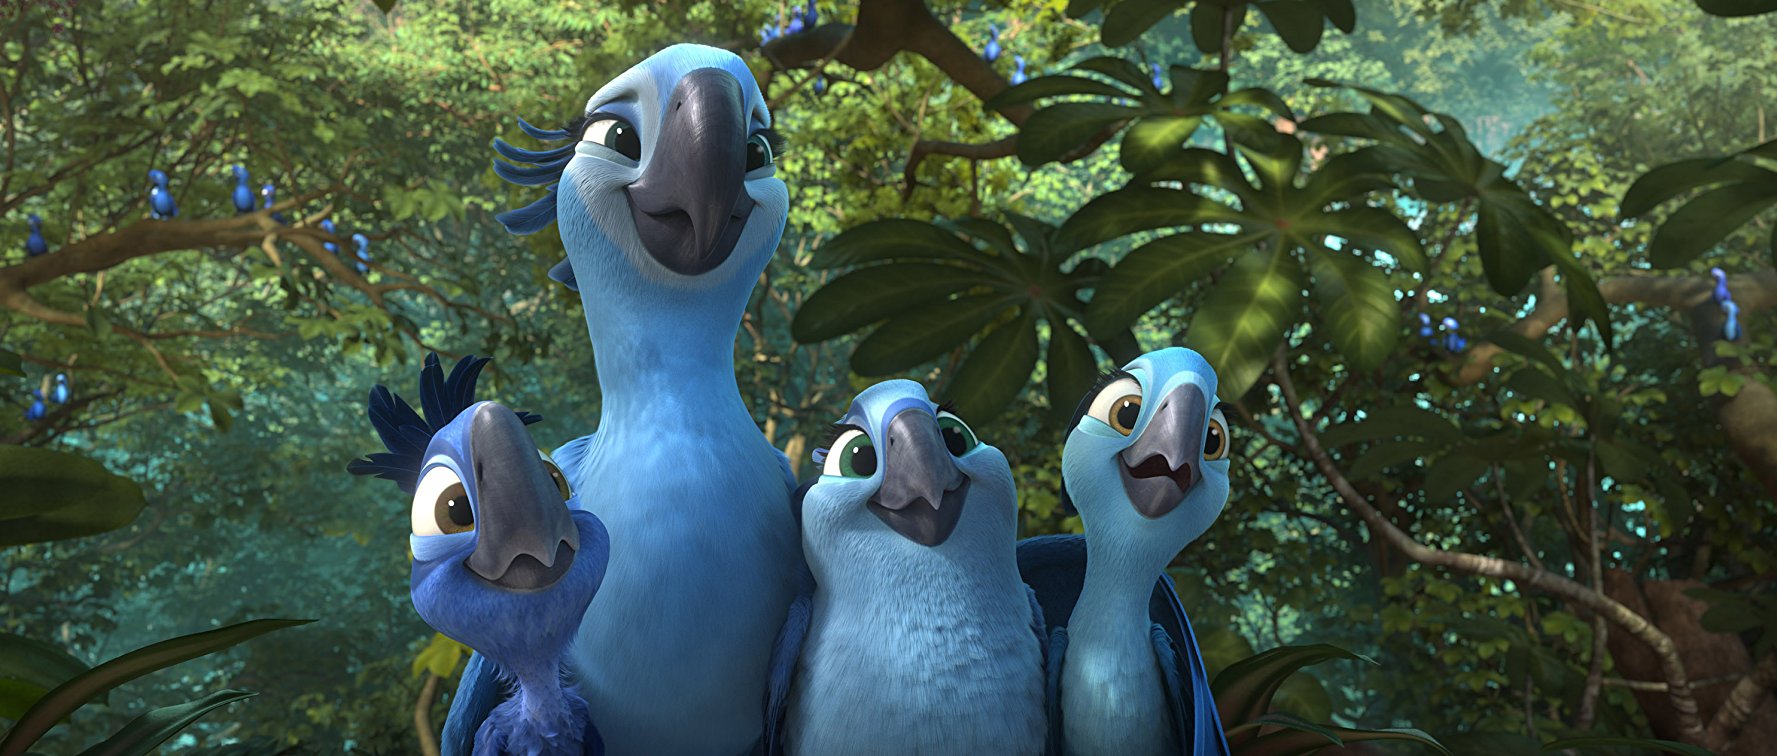 Character Tiago List Of Movies Character Rio 2